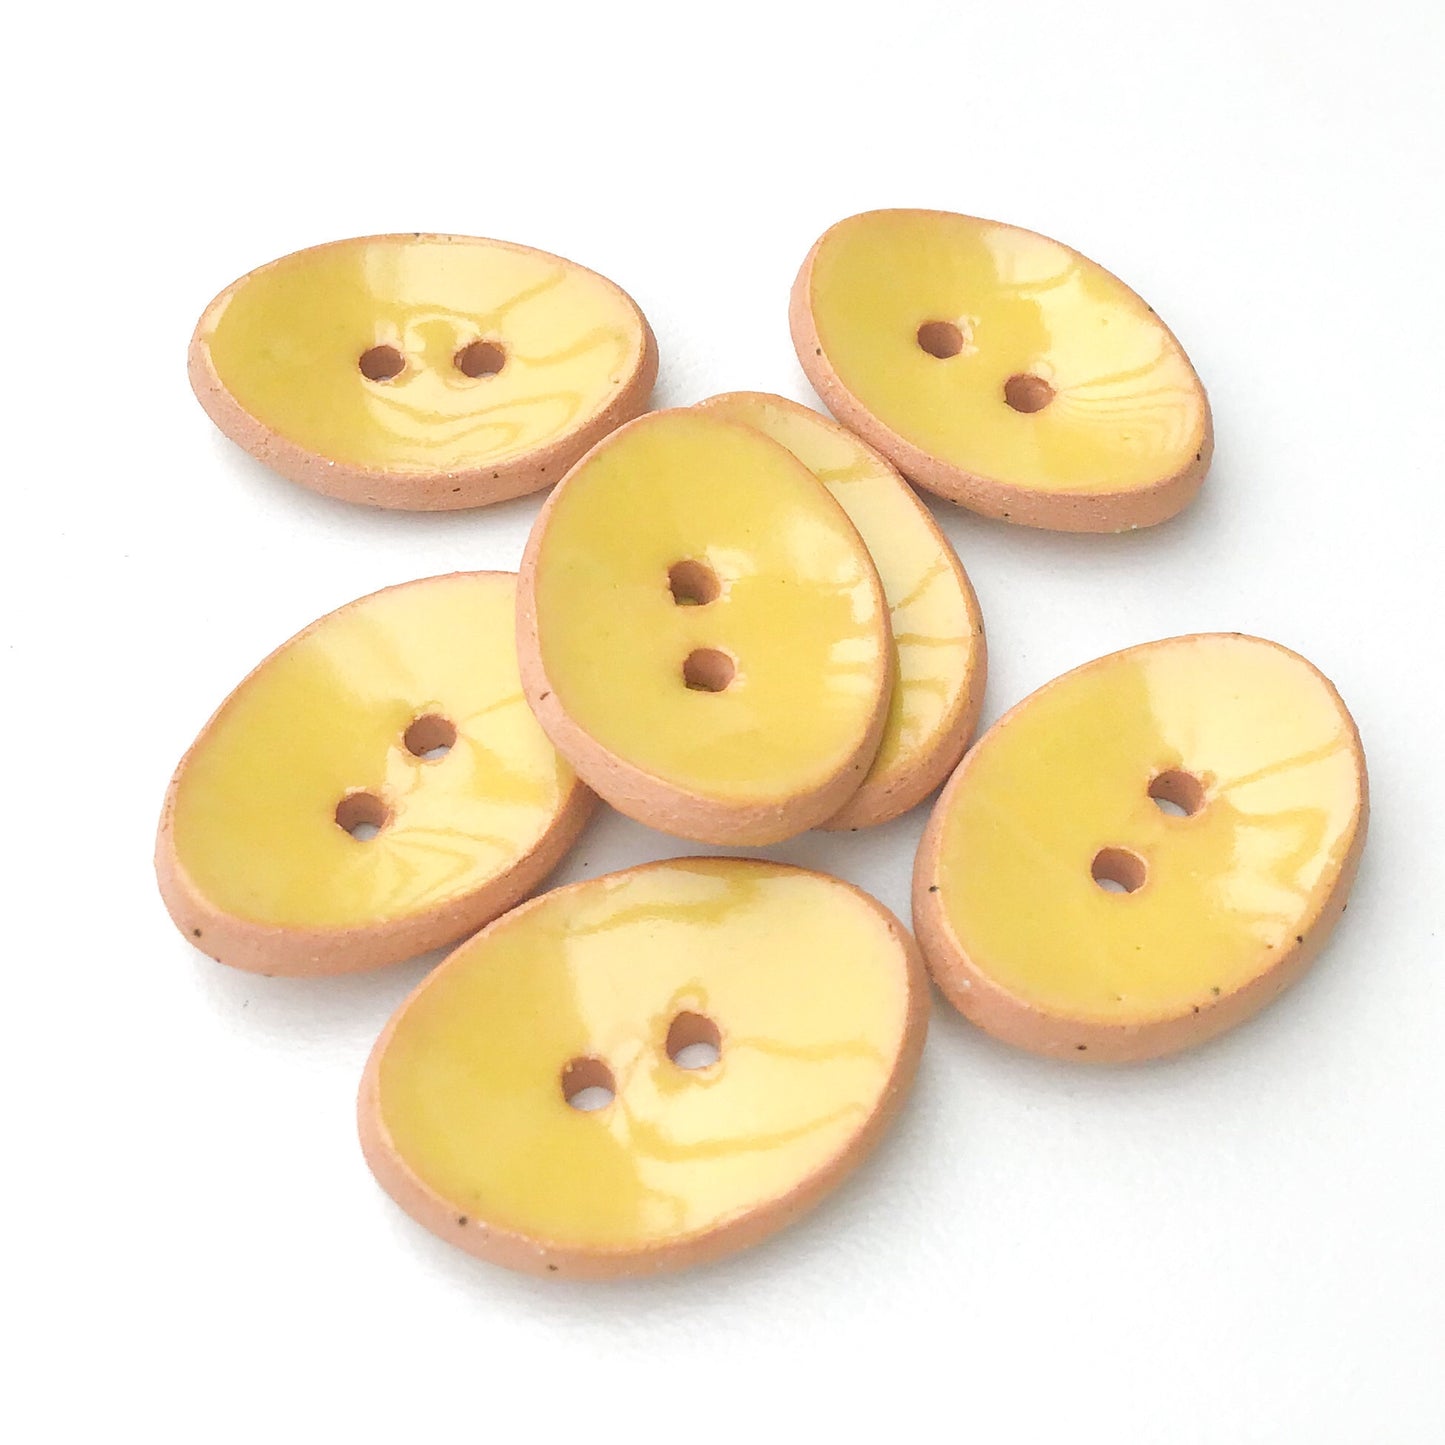 Oval Ceramic Buttons - Light Yellow Clay Buttons - 5/8" x 7/8" - 7 Pack